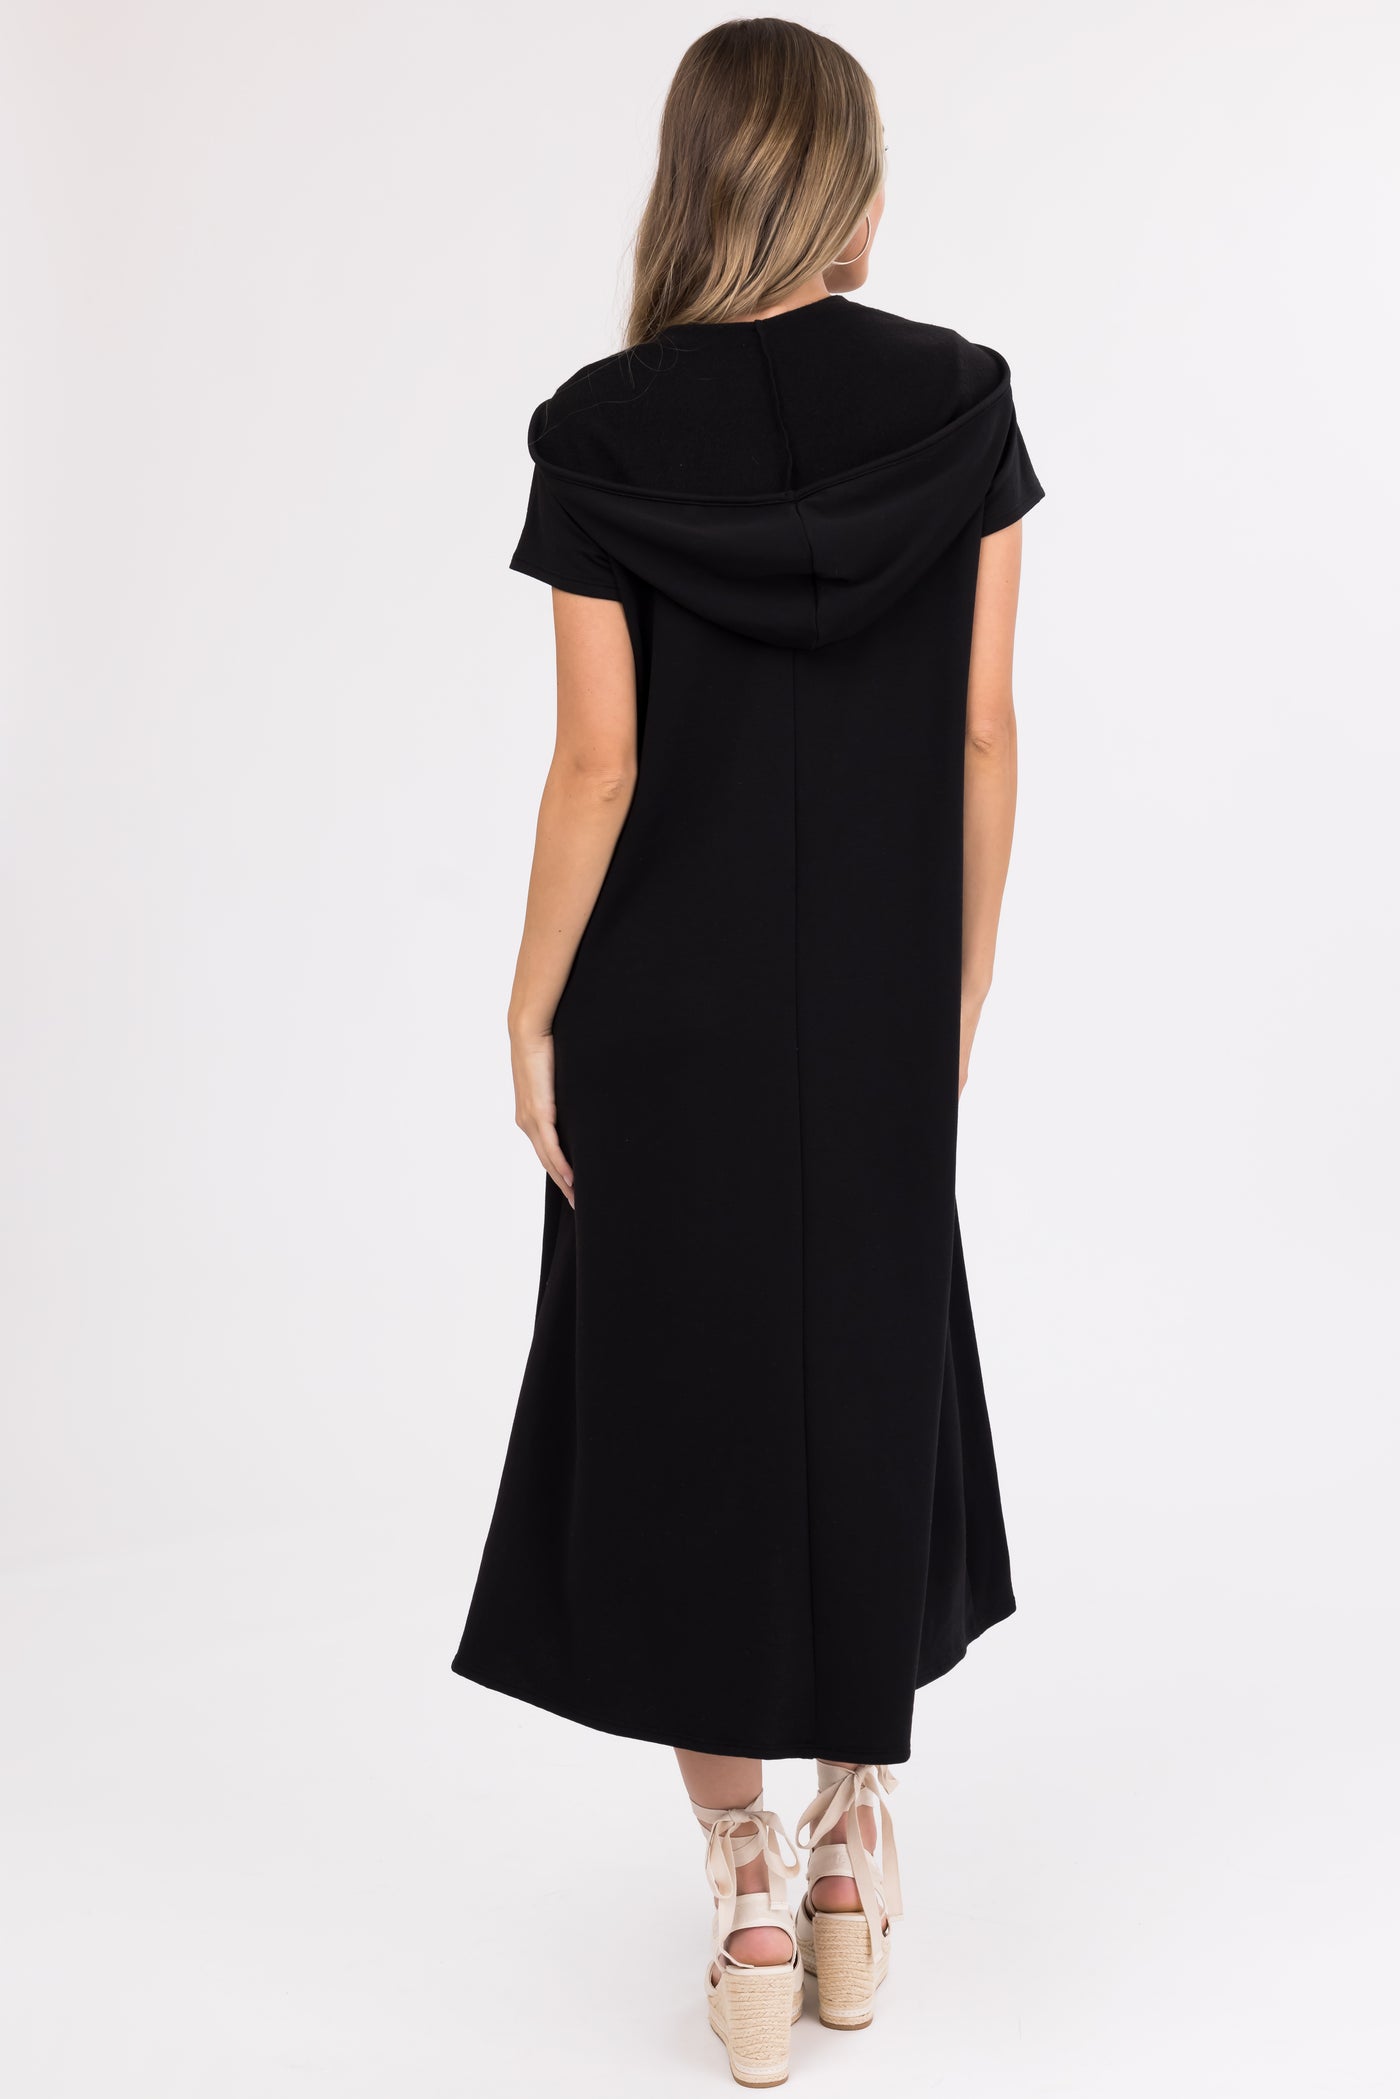 Black Oversized Casual Hooded Maxi Dress